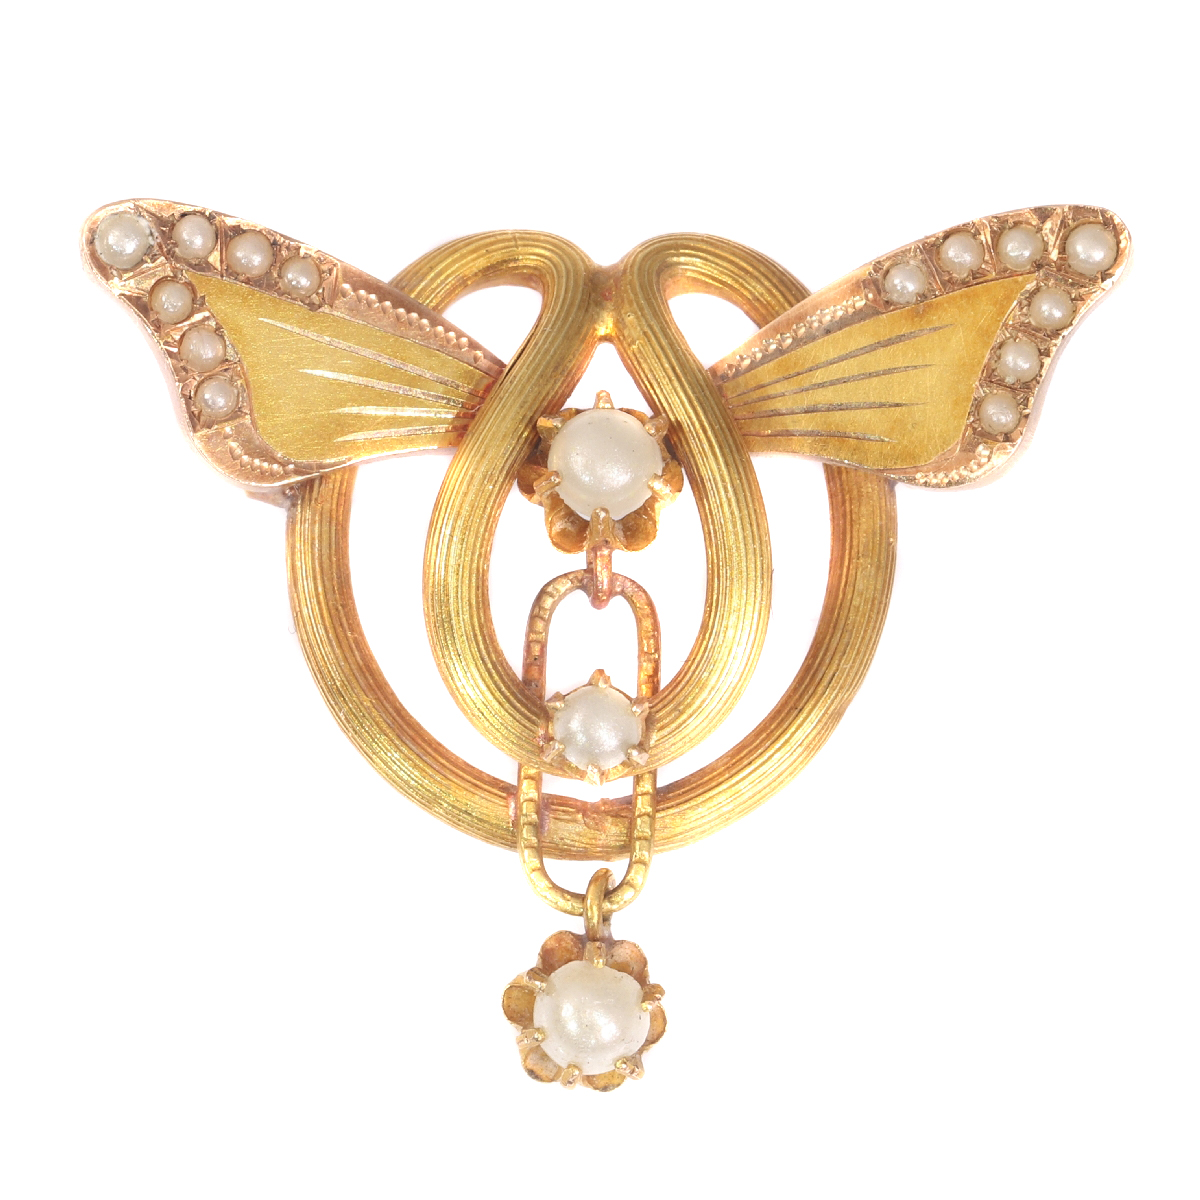 Antique gold brooch with butterfly wings set with half seed pearls